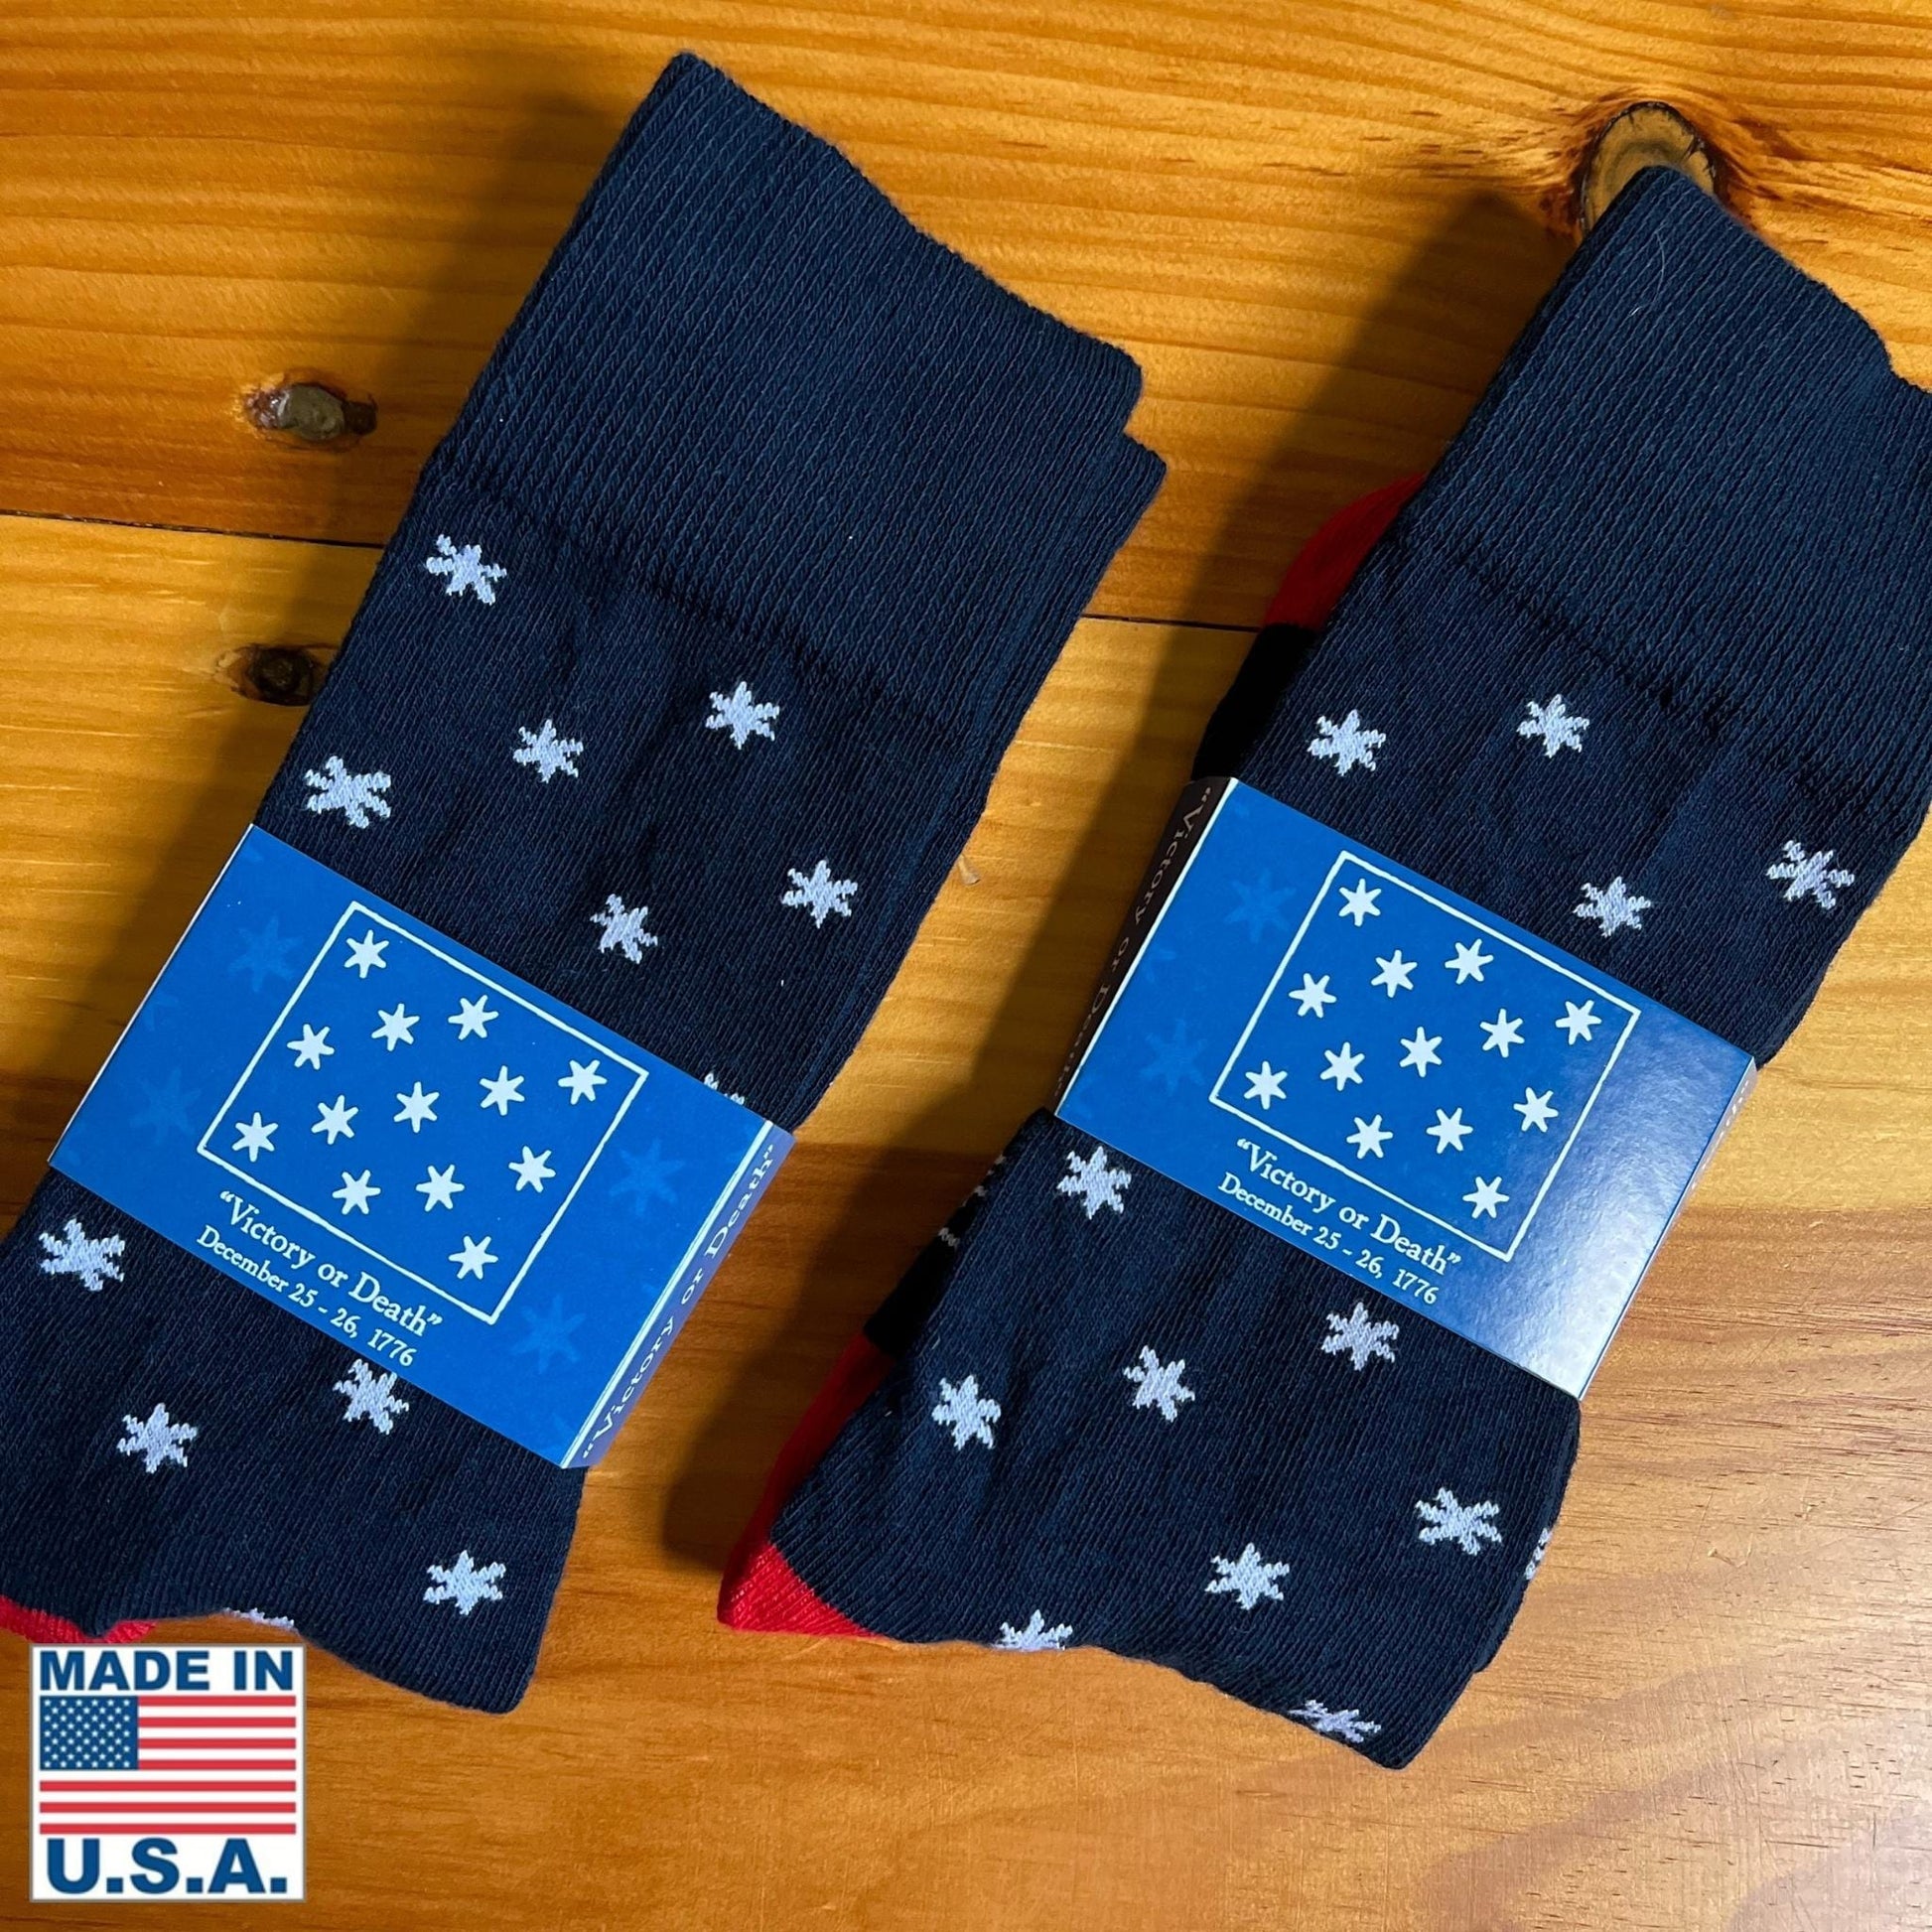 "Victory or Death" Socks — Made in USA from The History List store in their sockbands